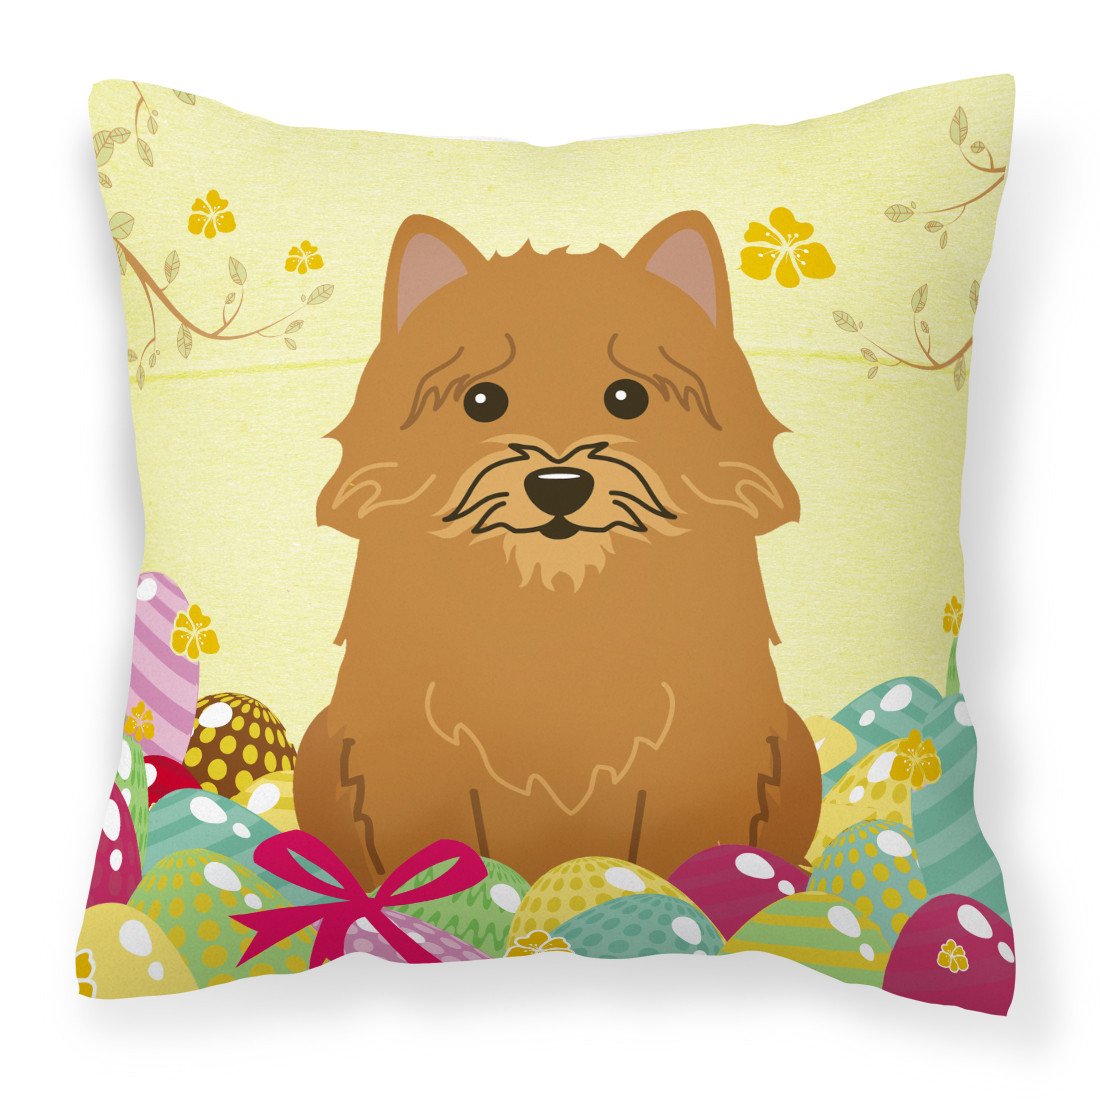 Easter Eggs Norwich Terrier Fabric Decorative Pillow BB6020PW1818 by Caroline's Treasures